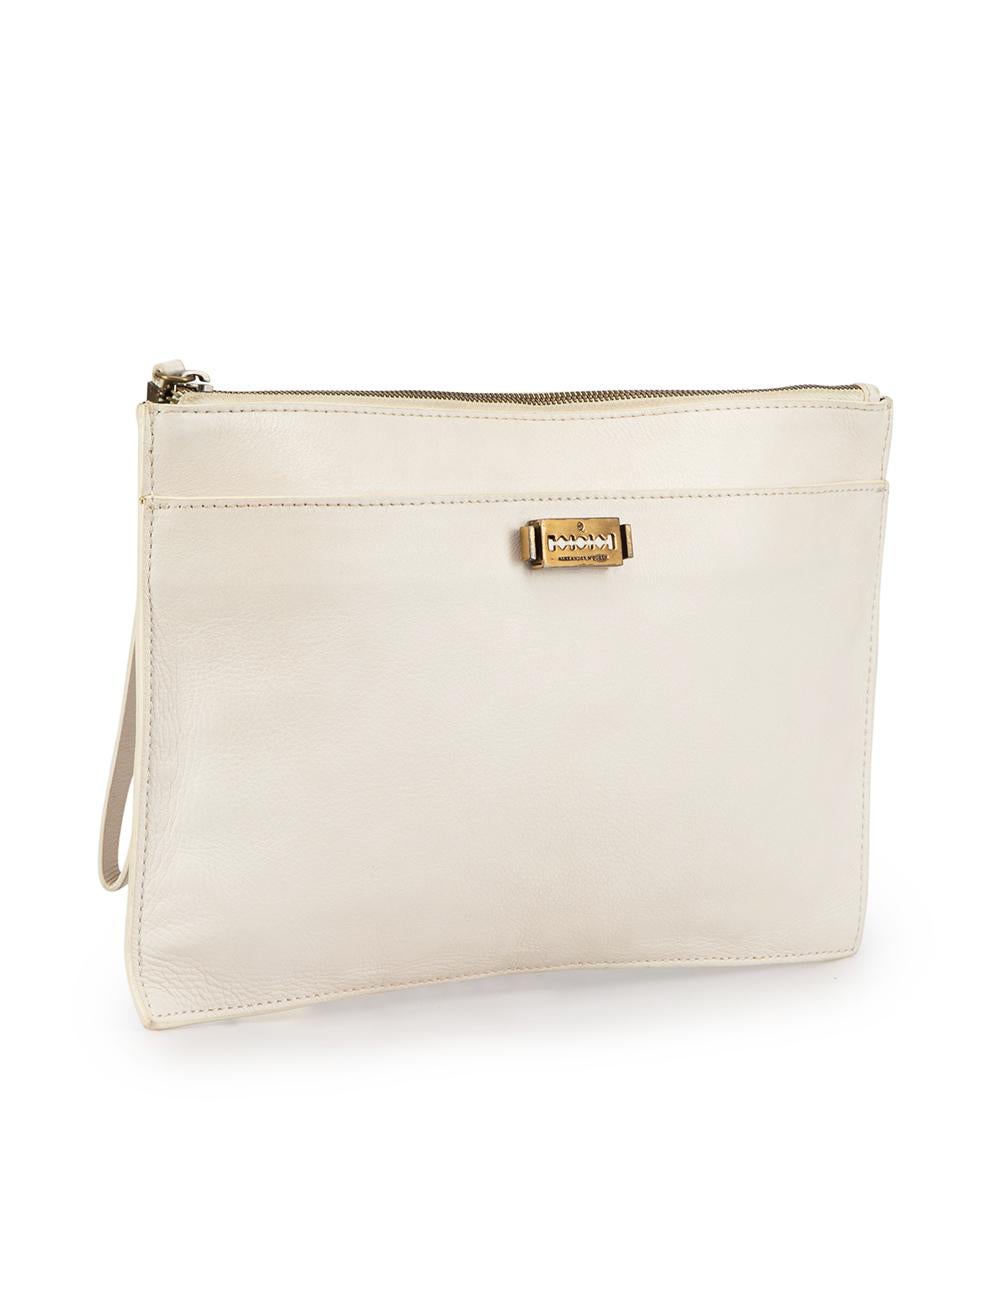 CONDITION is Good. Minor wear to clutch is evident. Light wear to the front and back with scratches and marks to the leather. The front clasp fastening also shows signs of tarnishing on this used McQ designer resale item. This item comes with